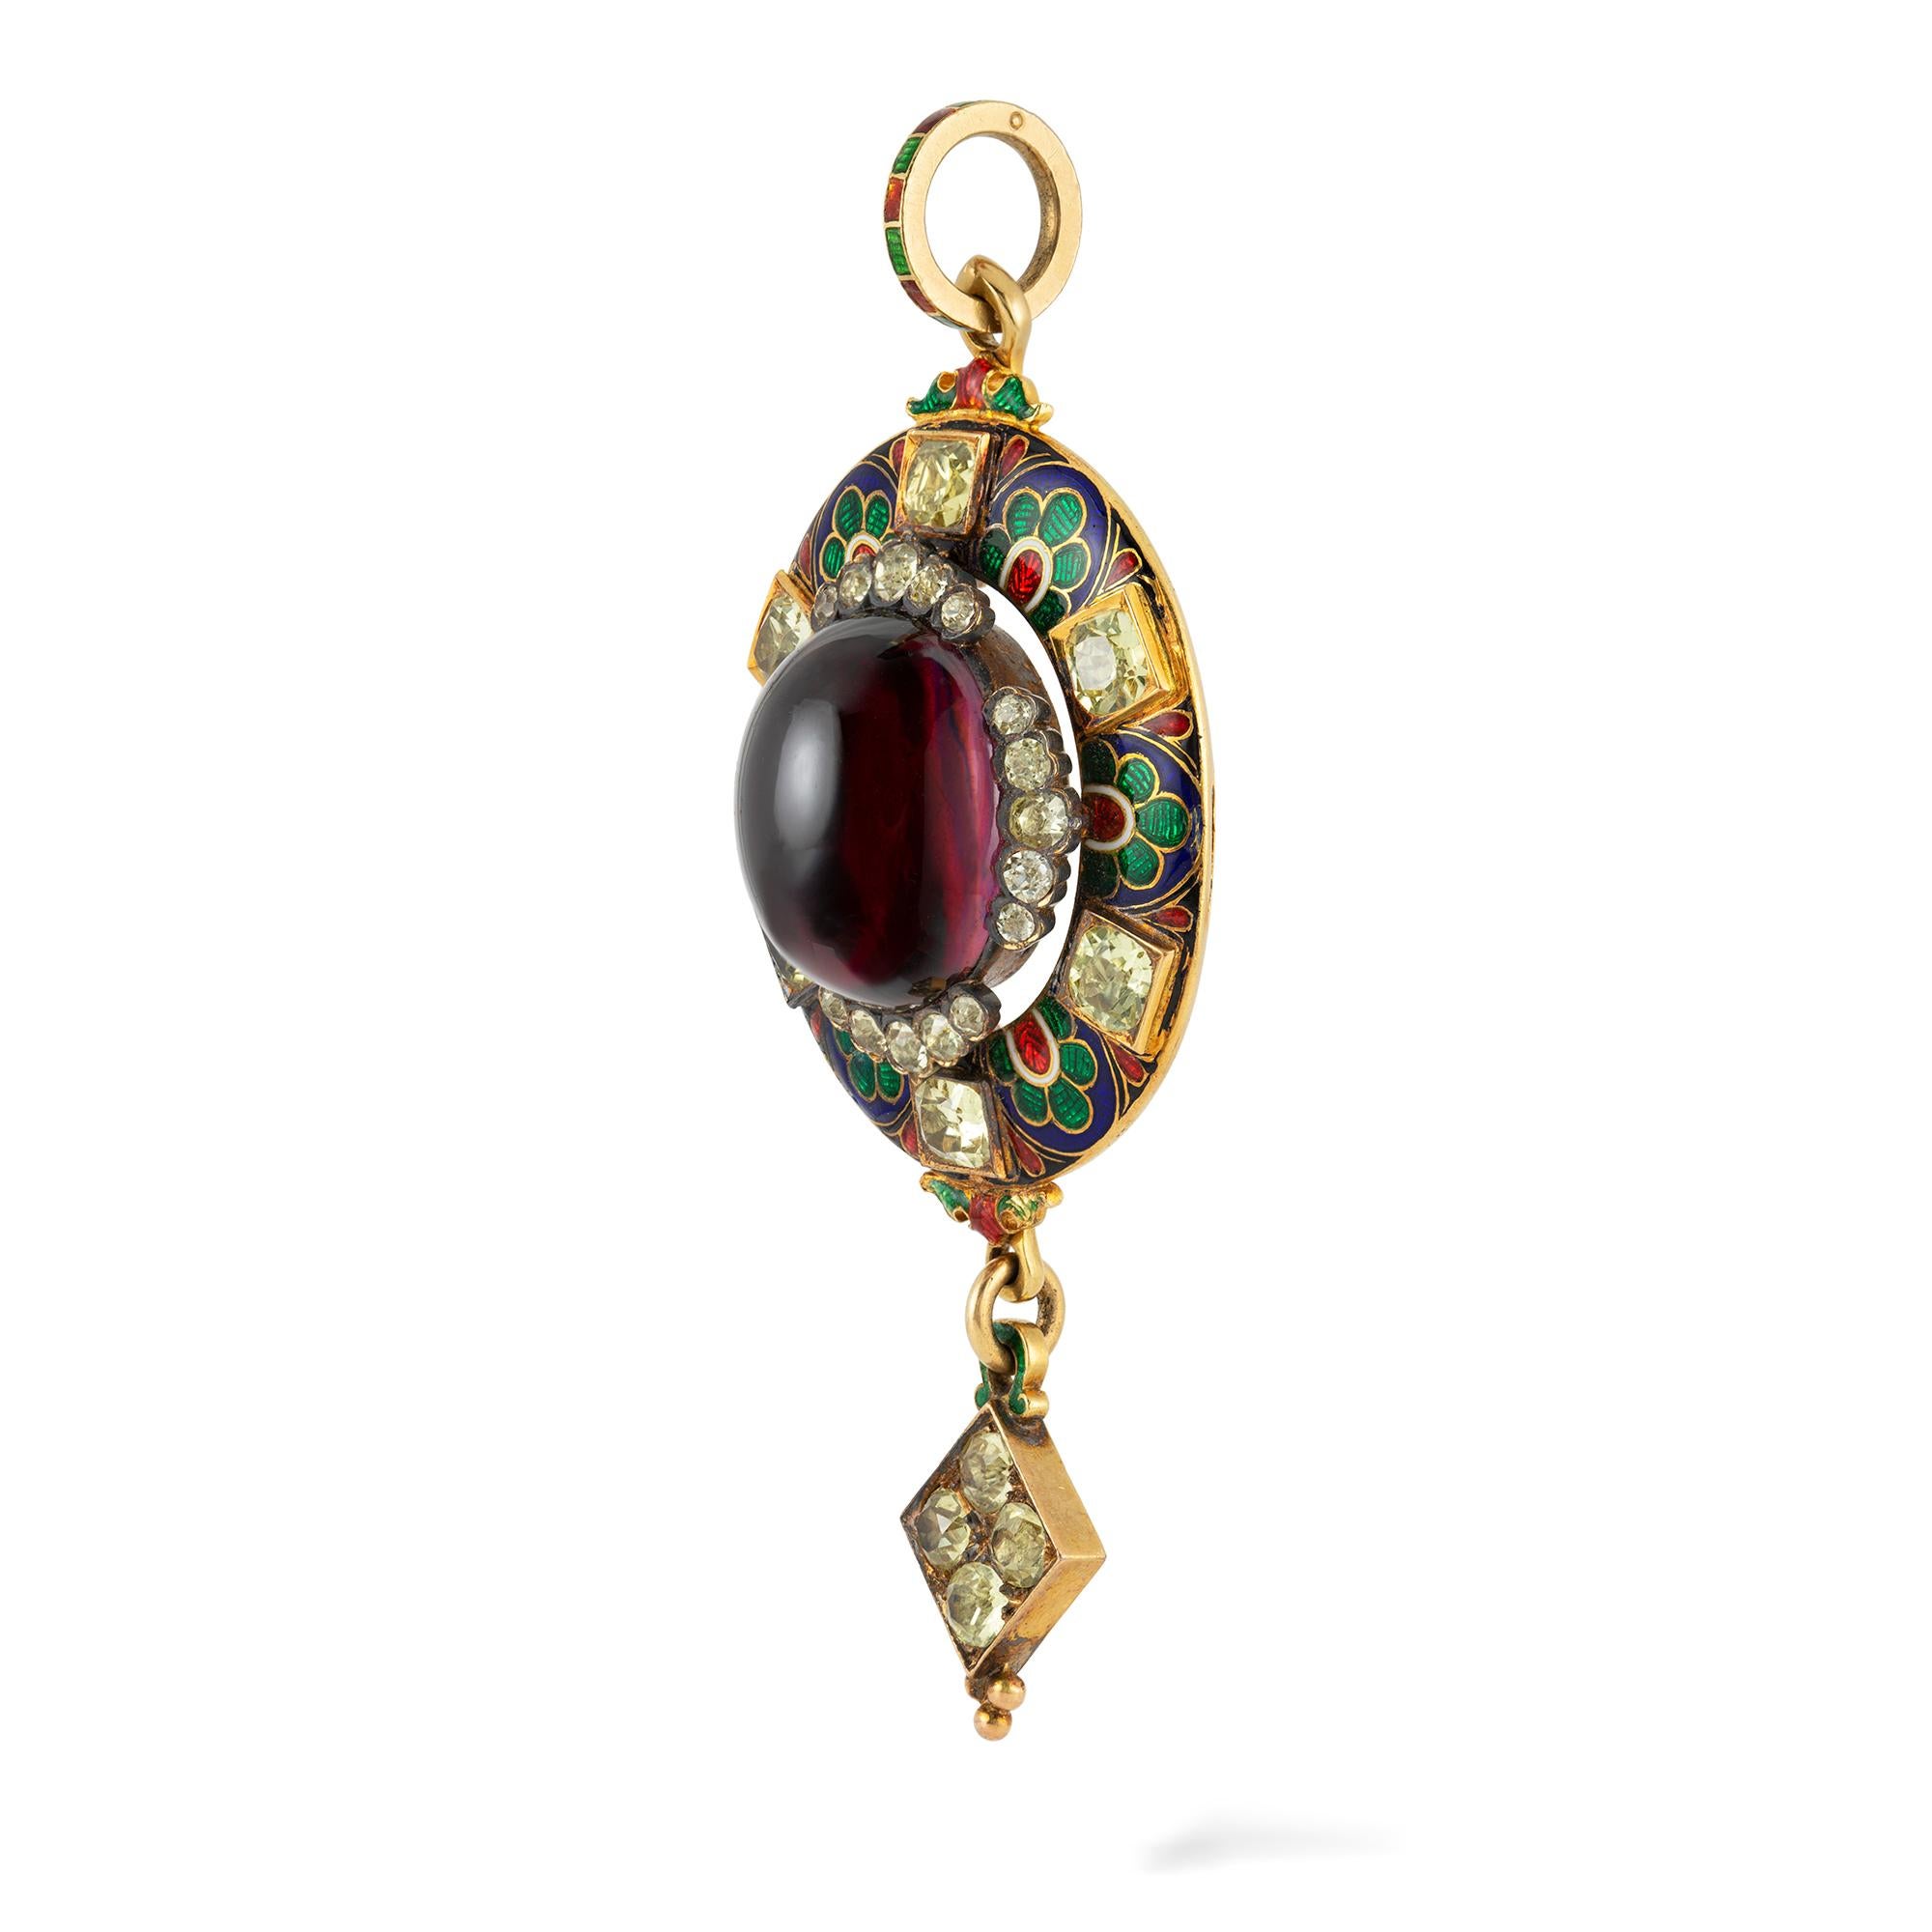 A Victorian Holbeinesque garnet, chyrsoberyl, gold and champlevé enamel pendant, to the centre with a cabochon garnet embellished with twenty small chrysoberyls, within a frame decorated with polychrome enamel encrusted with six large chrysoberyls,